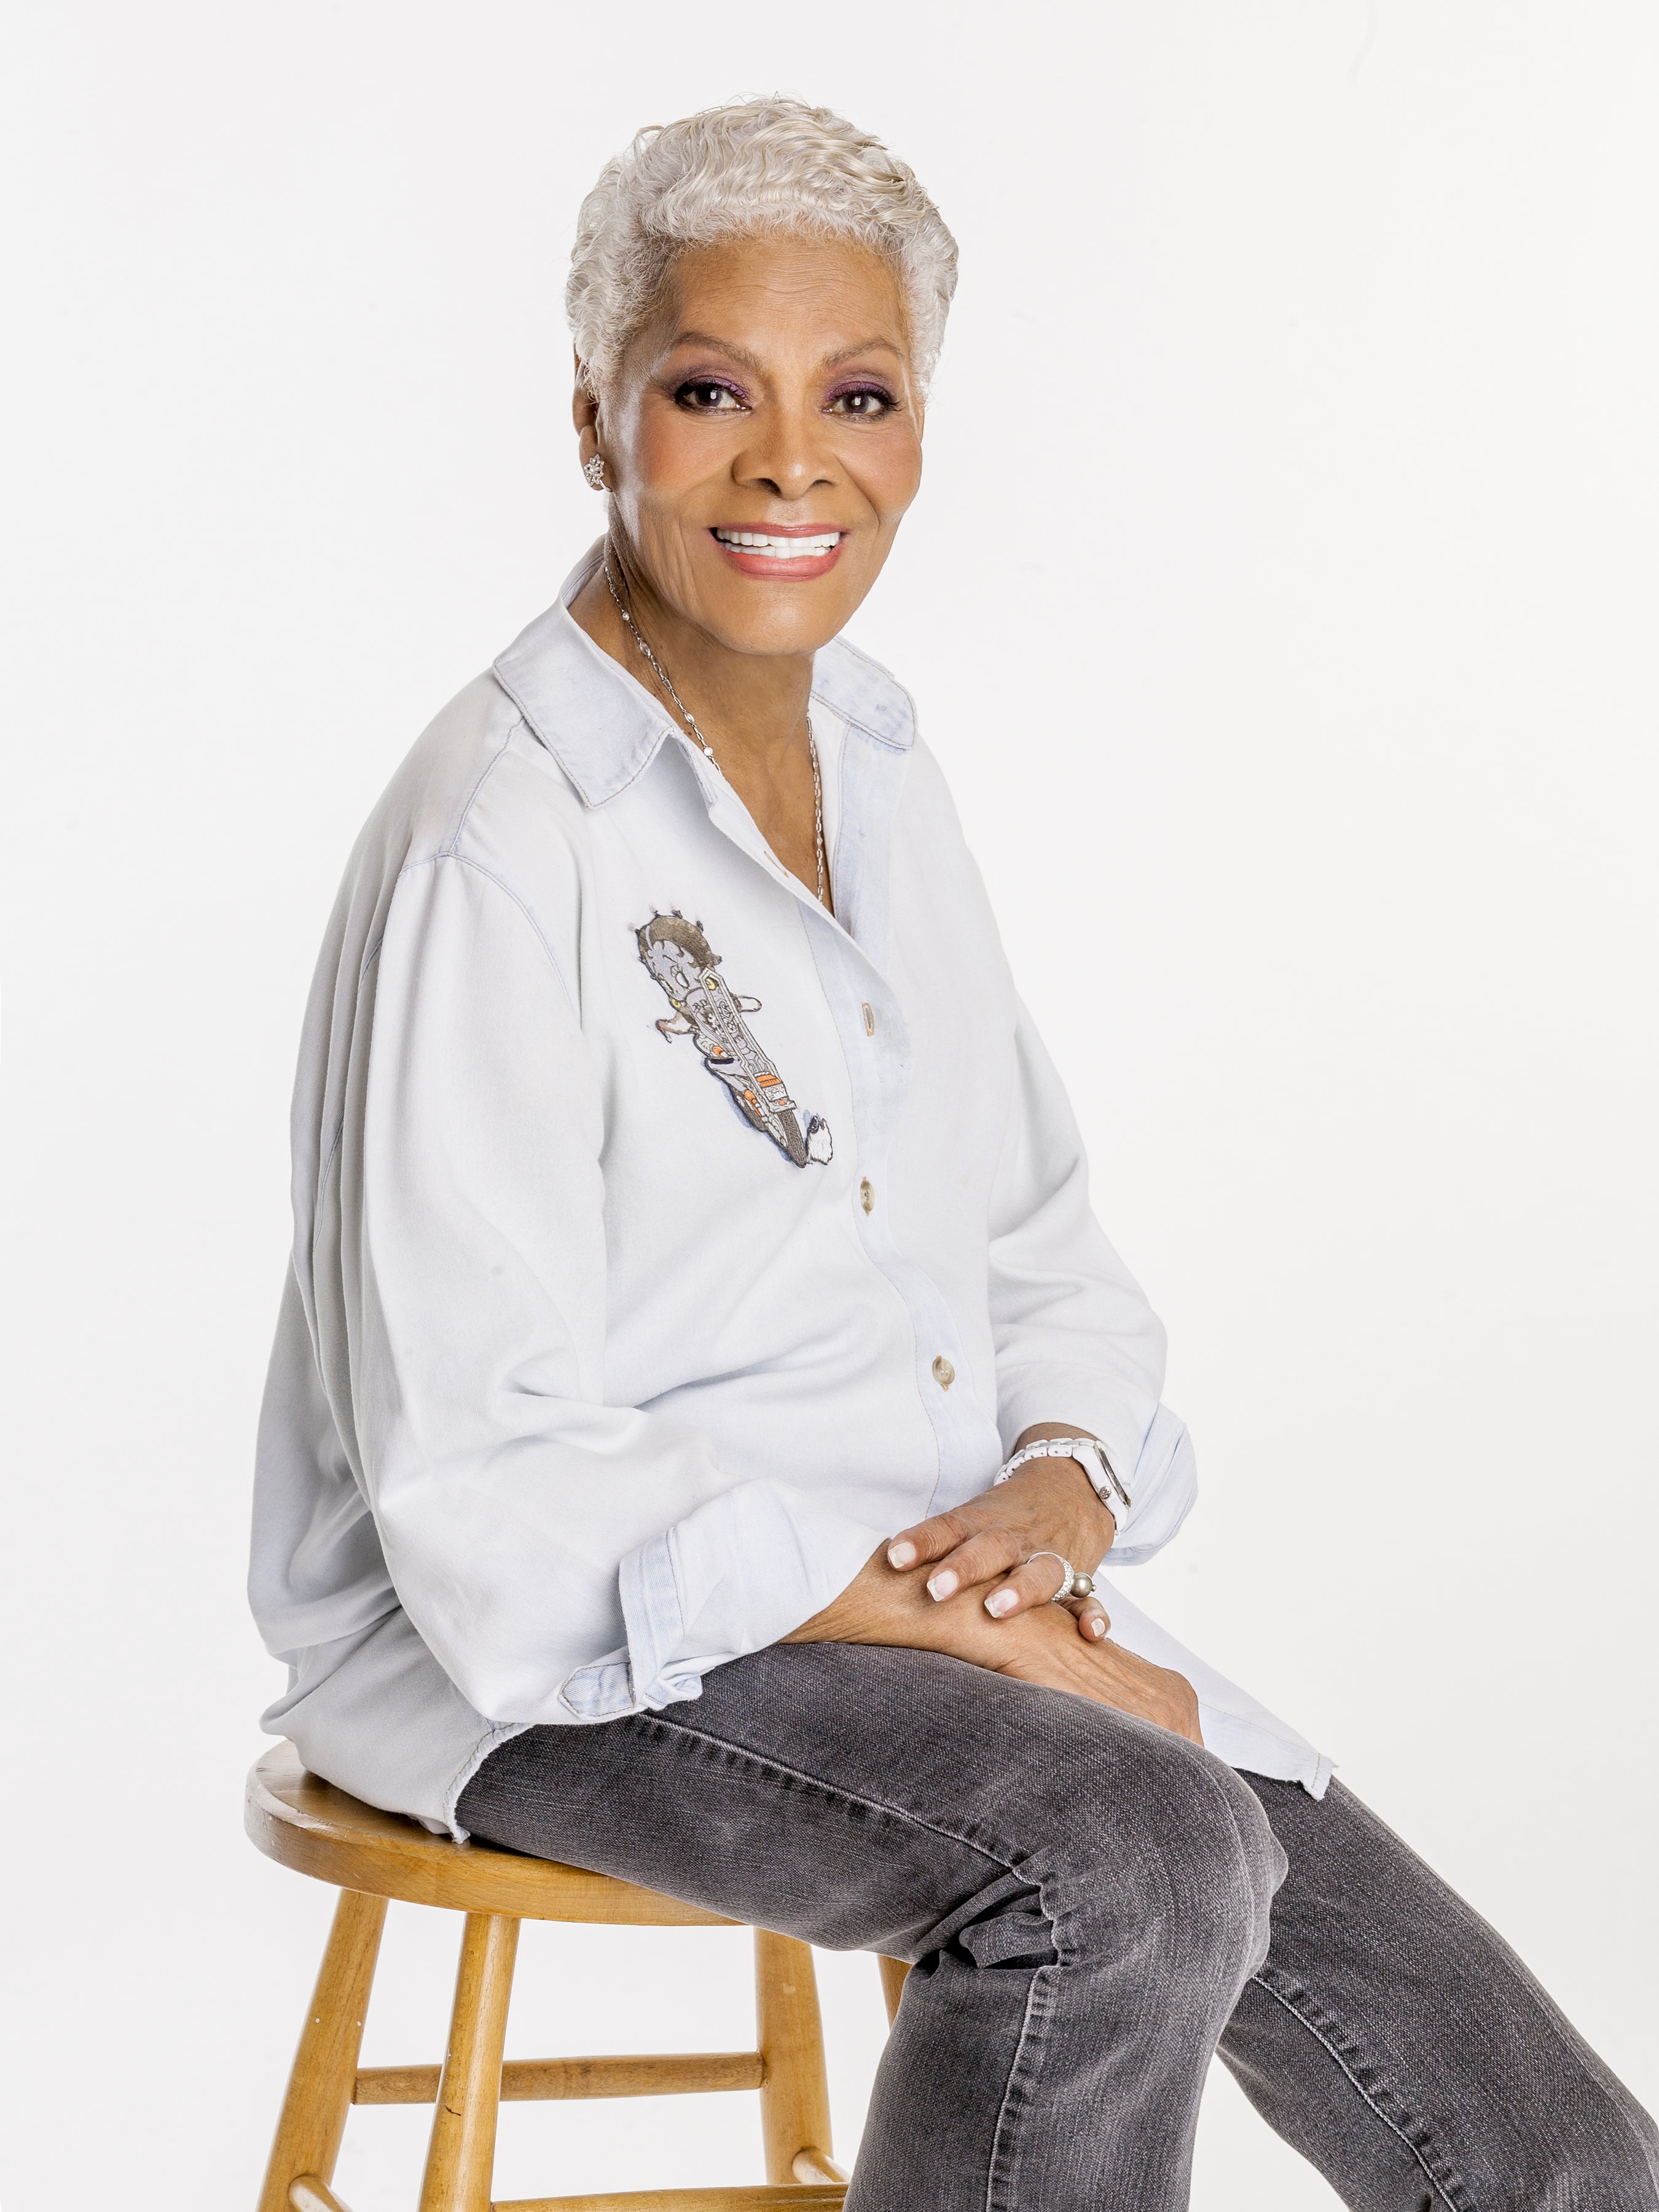 Dionne Warwick - Don't Make Me Over in Salford Quays promo photo for Priority from O2 presale offer code